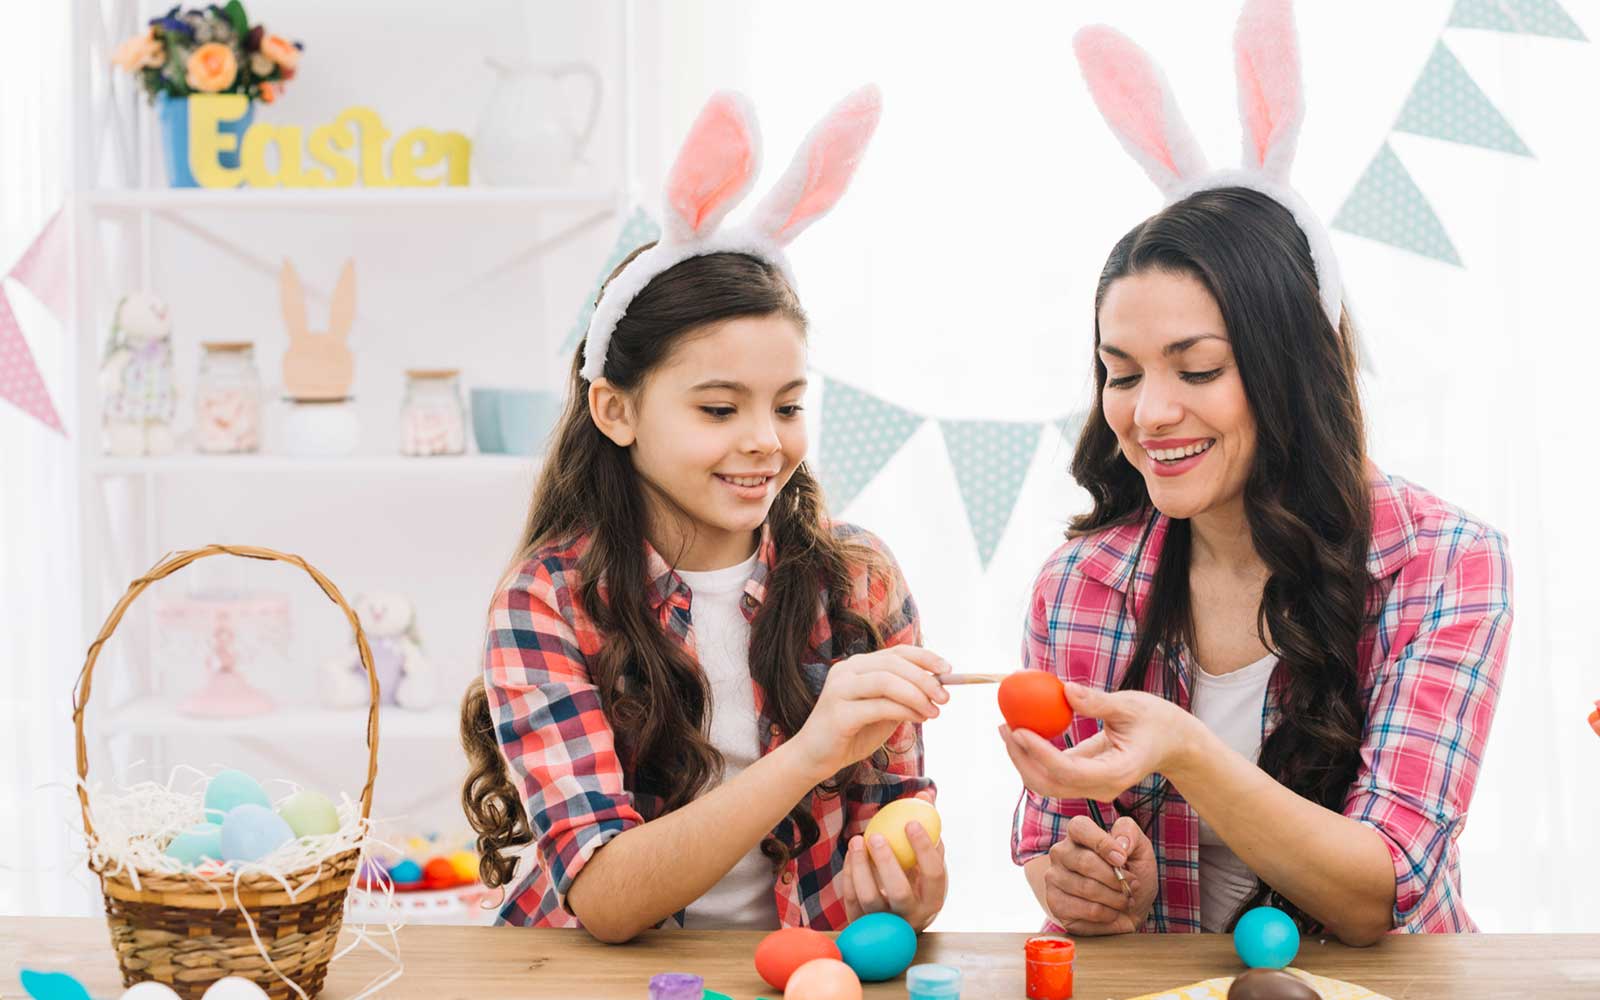 ¿Qué es Easter Day? - English4Kids